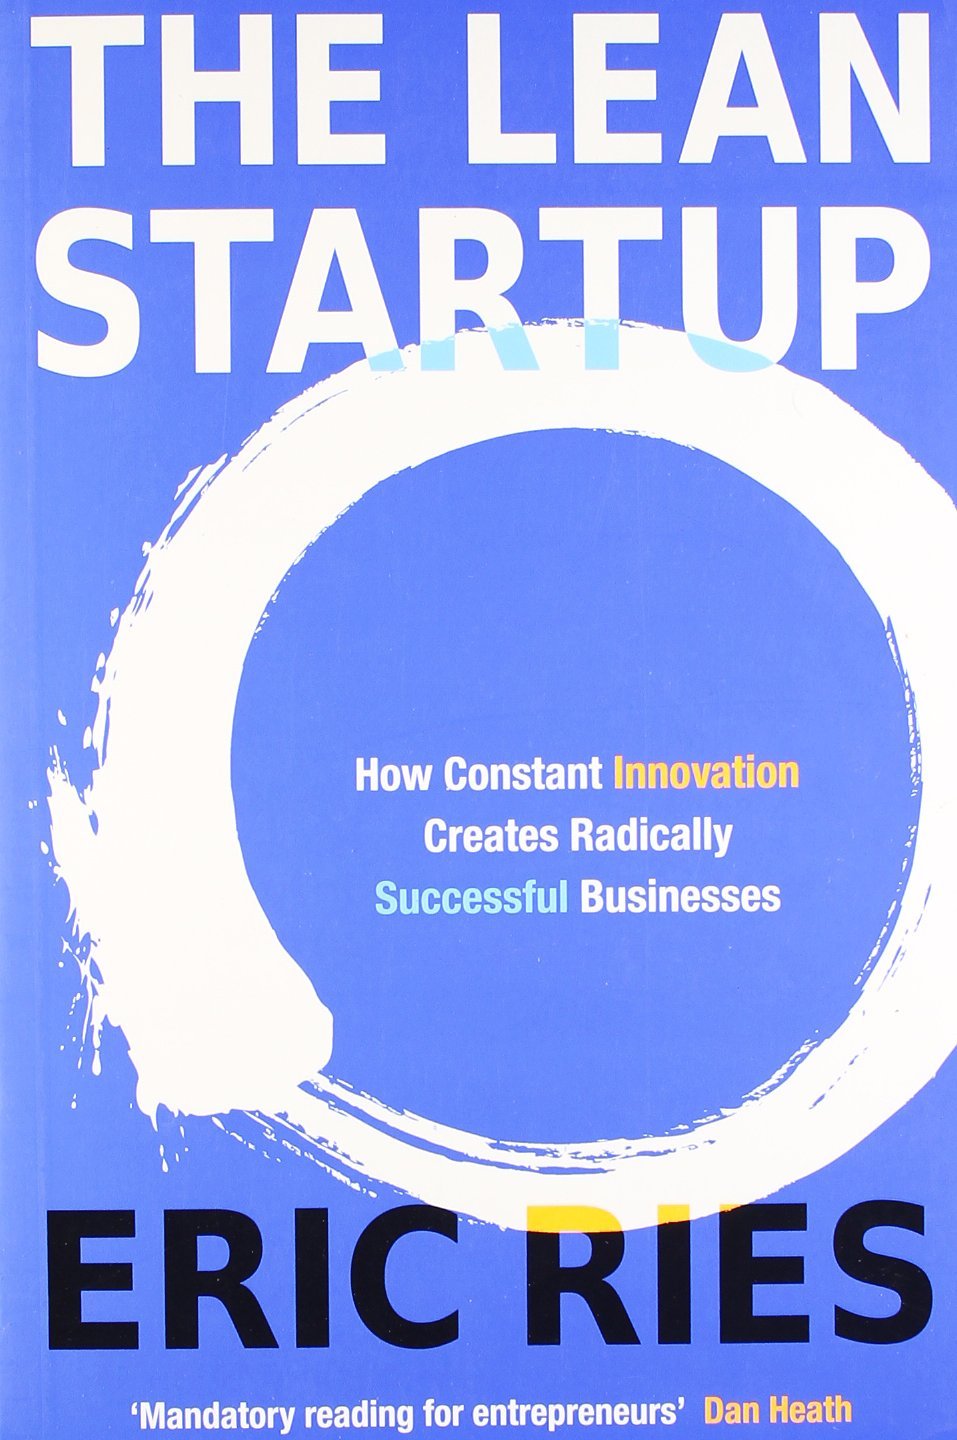 The Lean Startup Summary